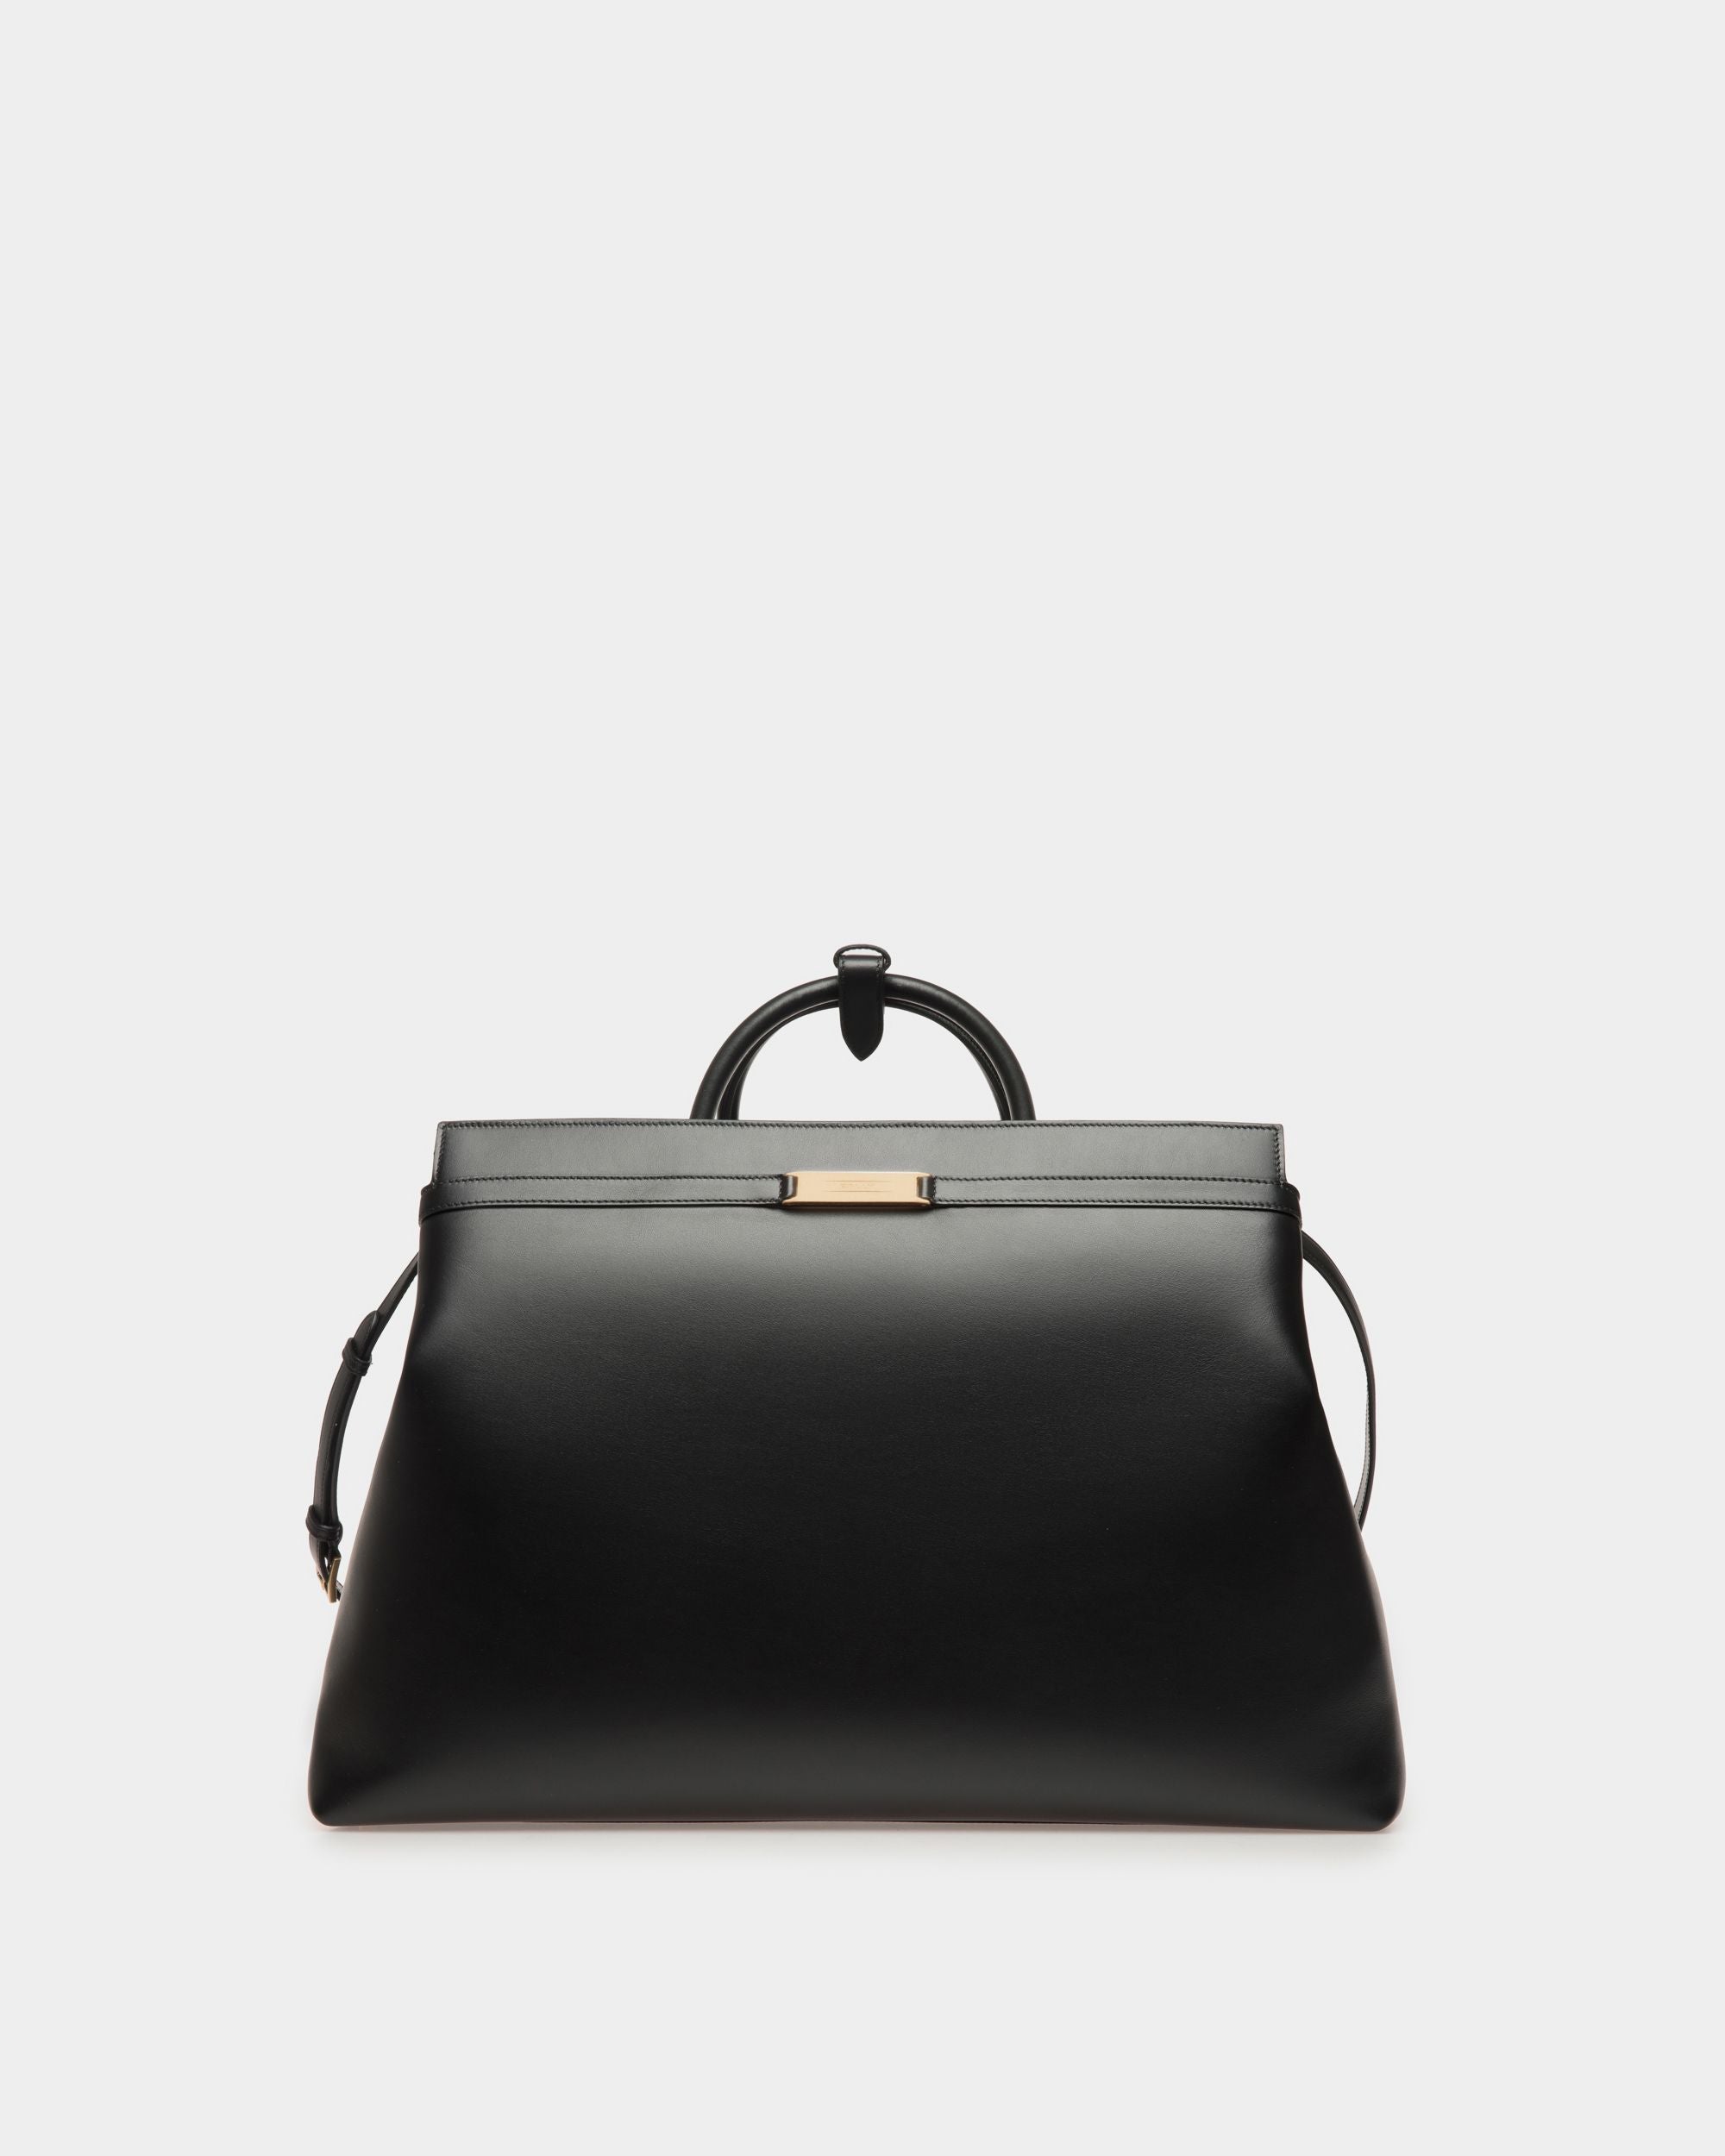 Men's Deco Weekender in Black Leather | Bally | Still Life Front